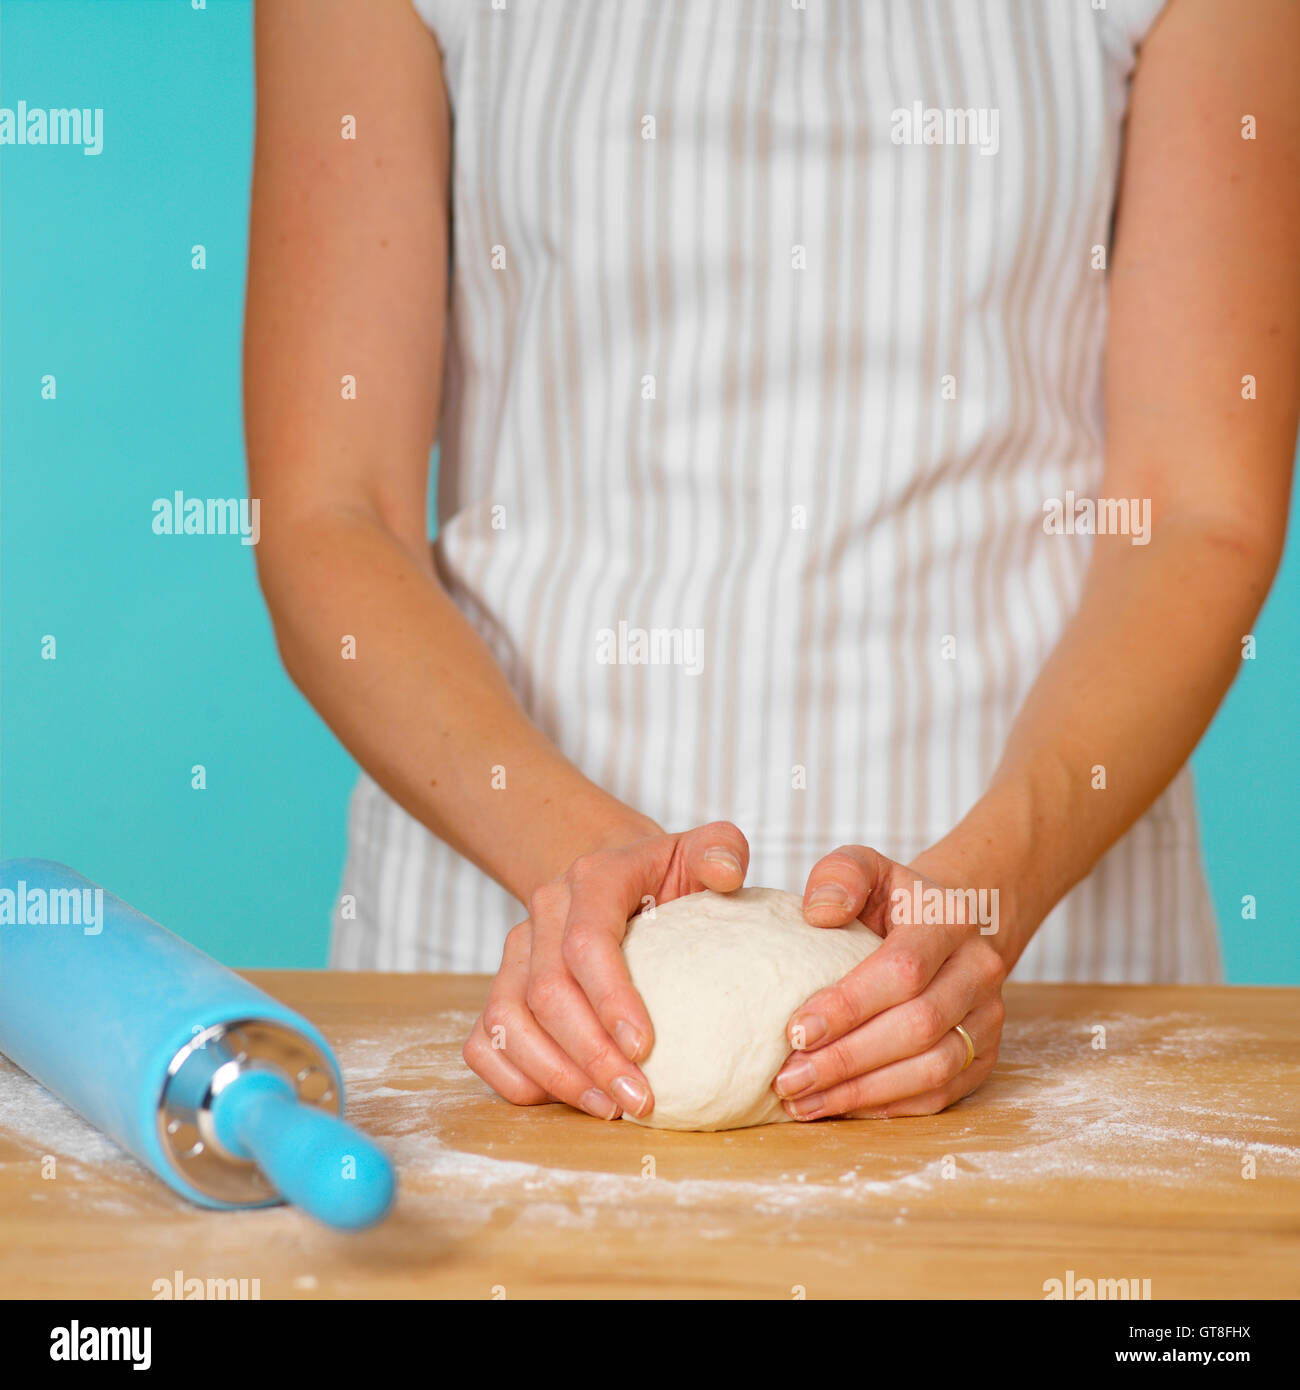 Woman in Striped Apron Kneading Dough on Wooden Surface with Blue Rolling Pin Stock Photo